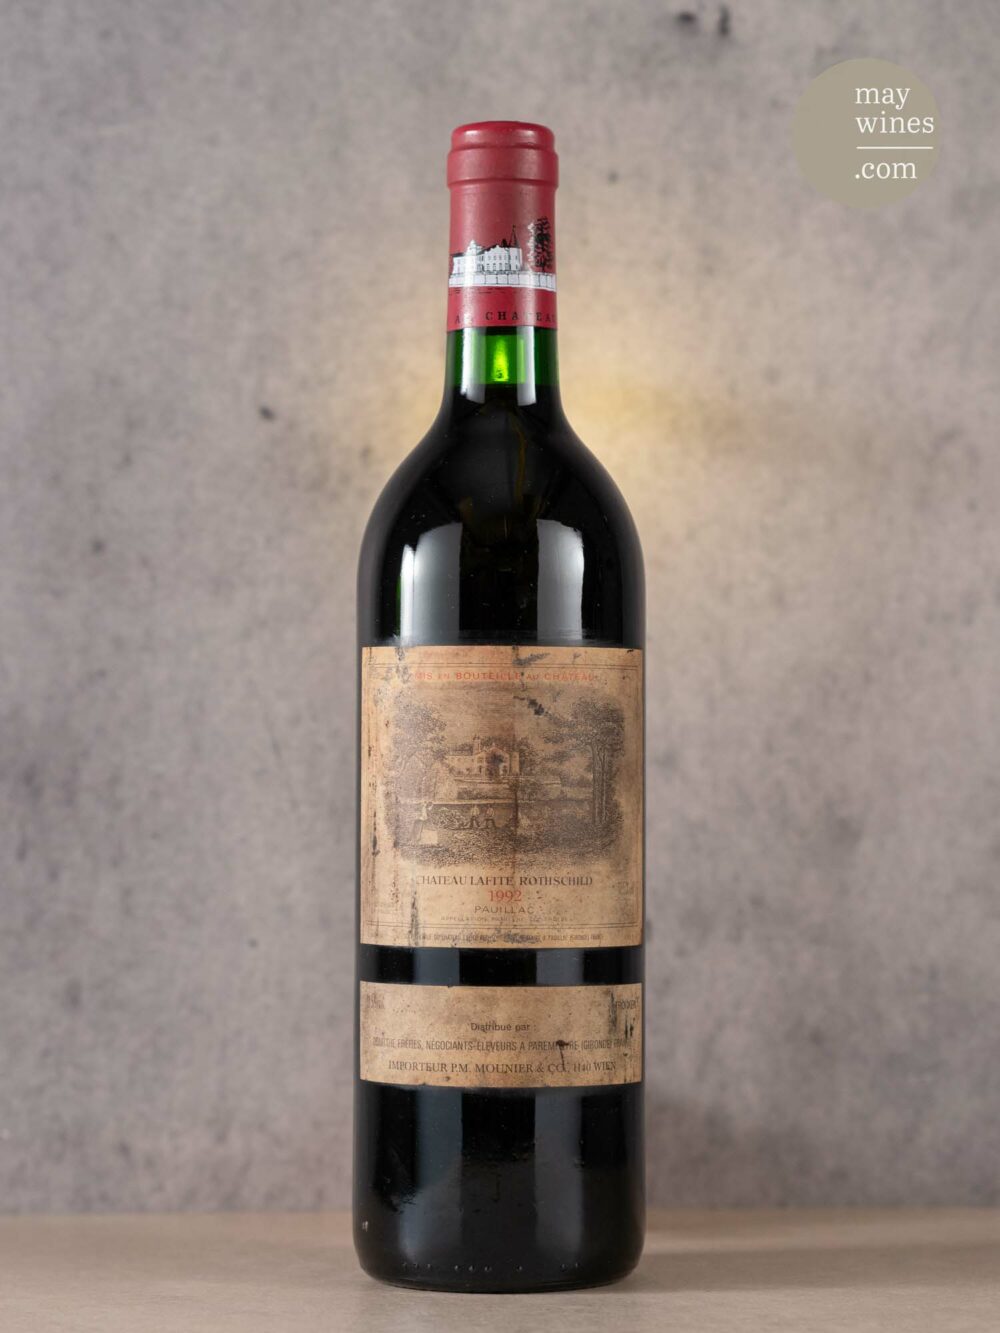 May Wines – Rotwein – 1992 Château Lafite Rothschild